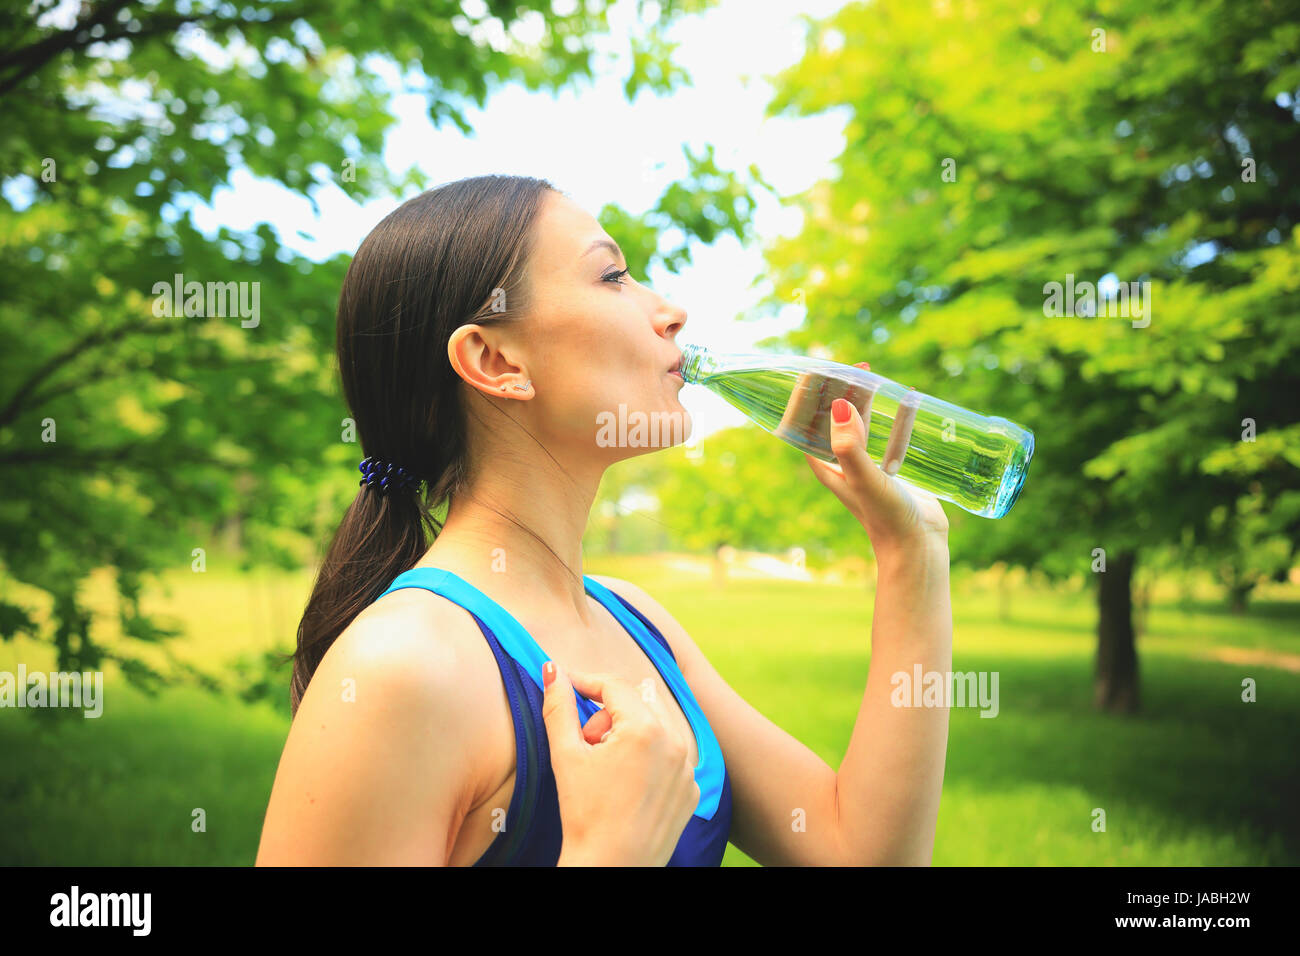 Sports outdoors scene. Brunette girl drinks water in park after fitness trainiing. Vivid sport background. Stock Photo